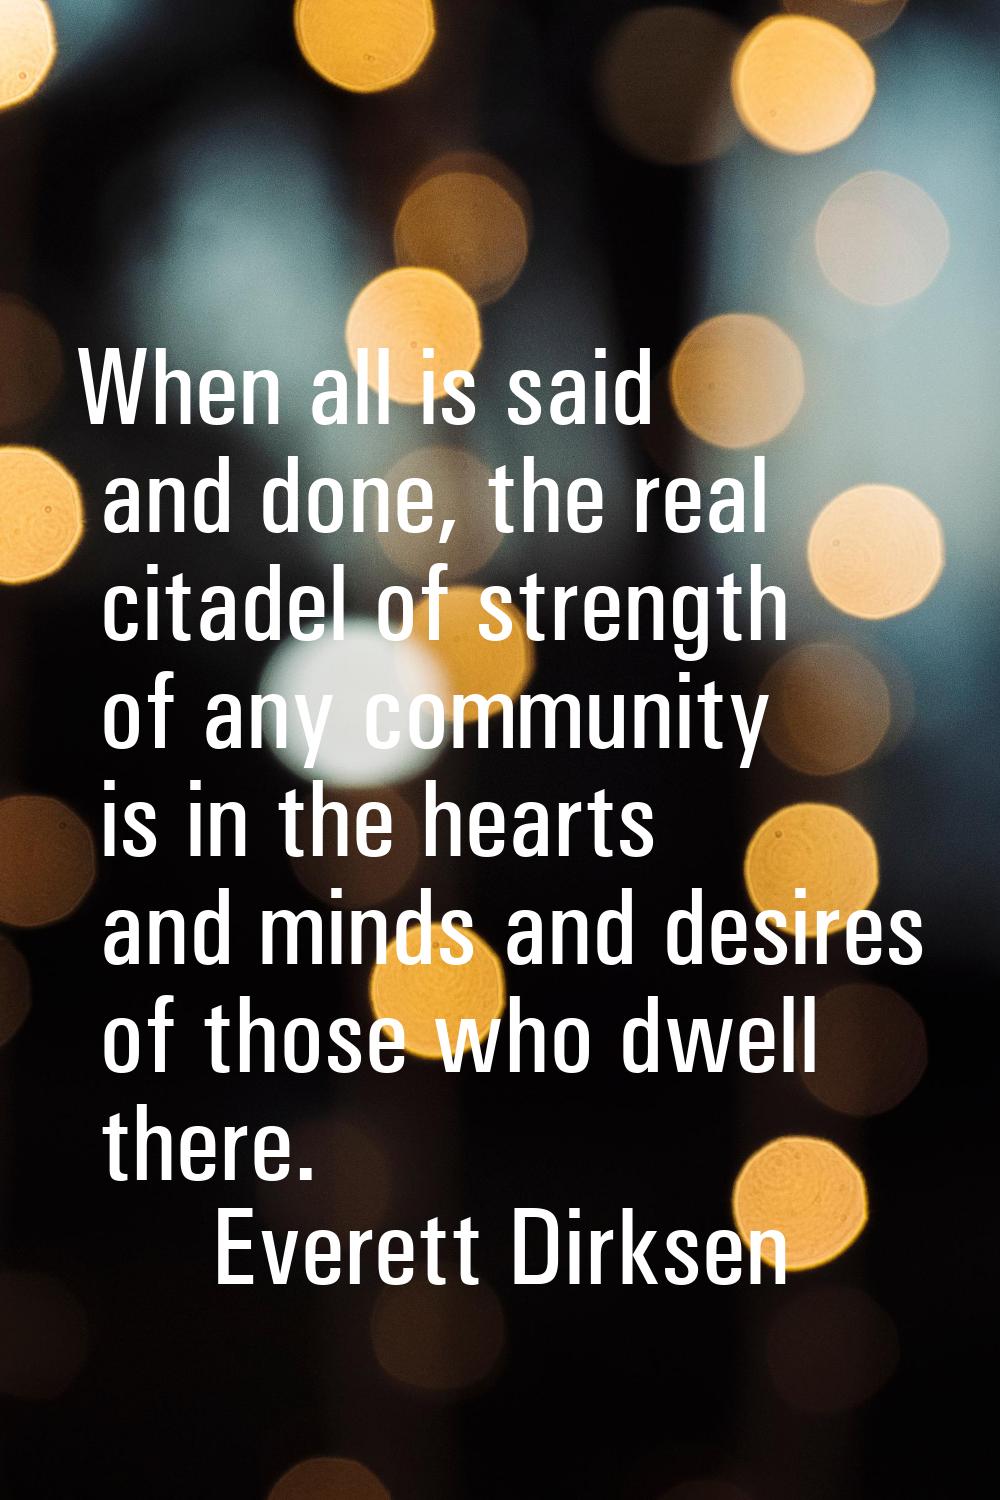 When all is said and done, the real citadel of strength of any community is in the hearts and minds